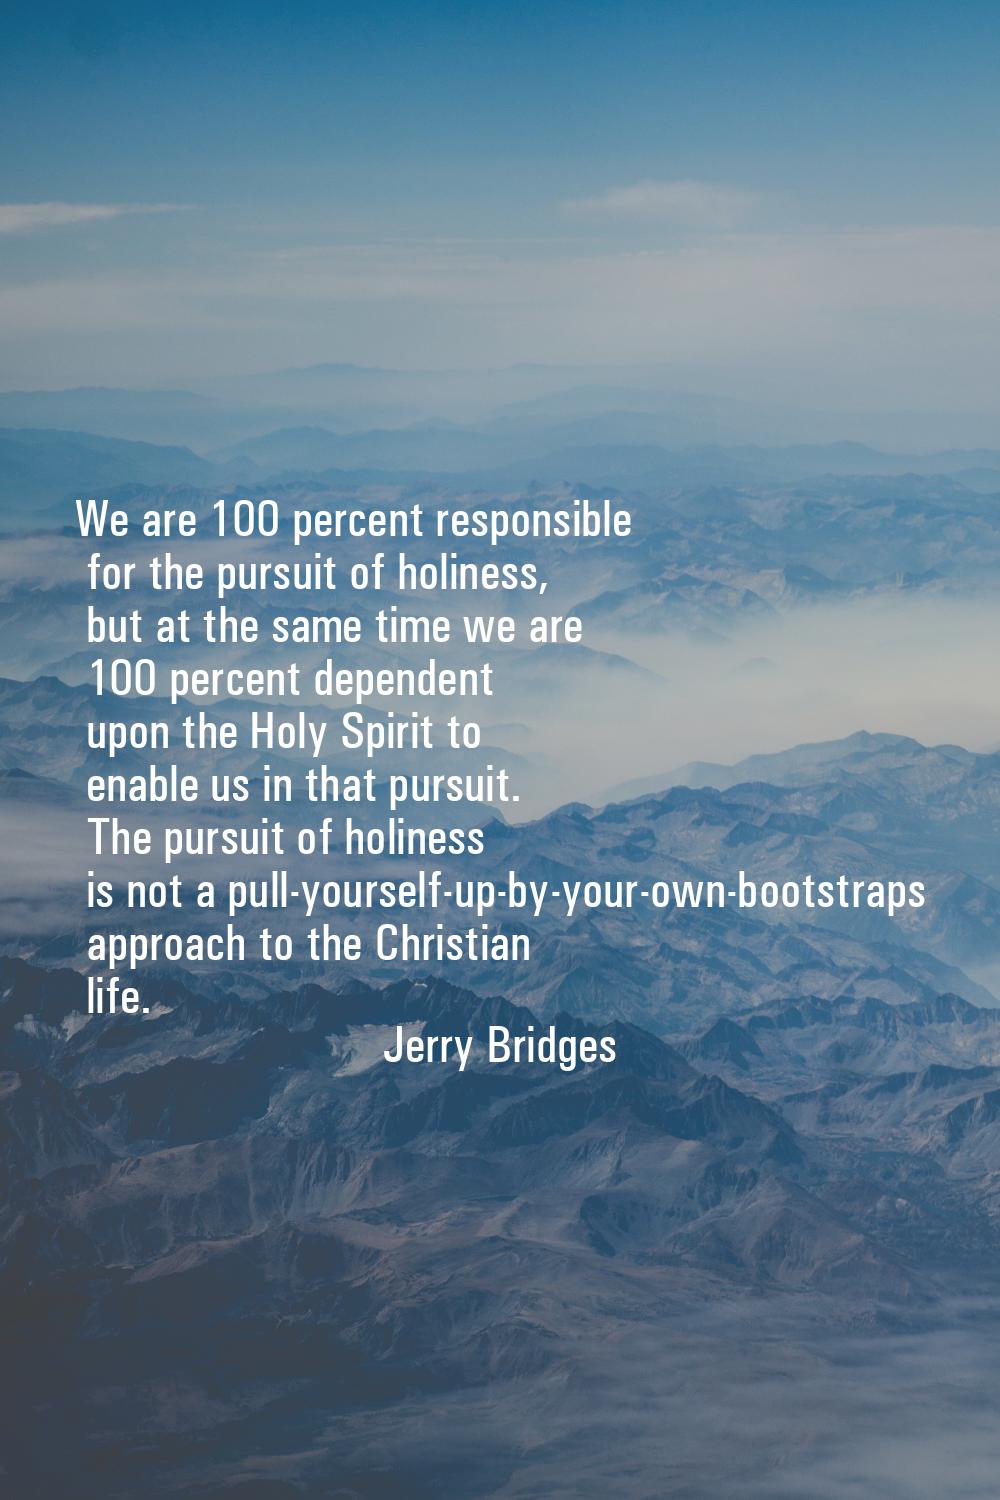 We are 100 percent responsible for the pursuit of holiness, but at the same time we are 100 percent